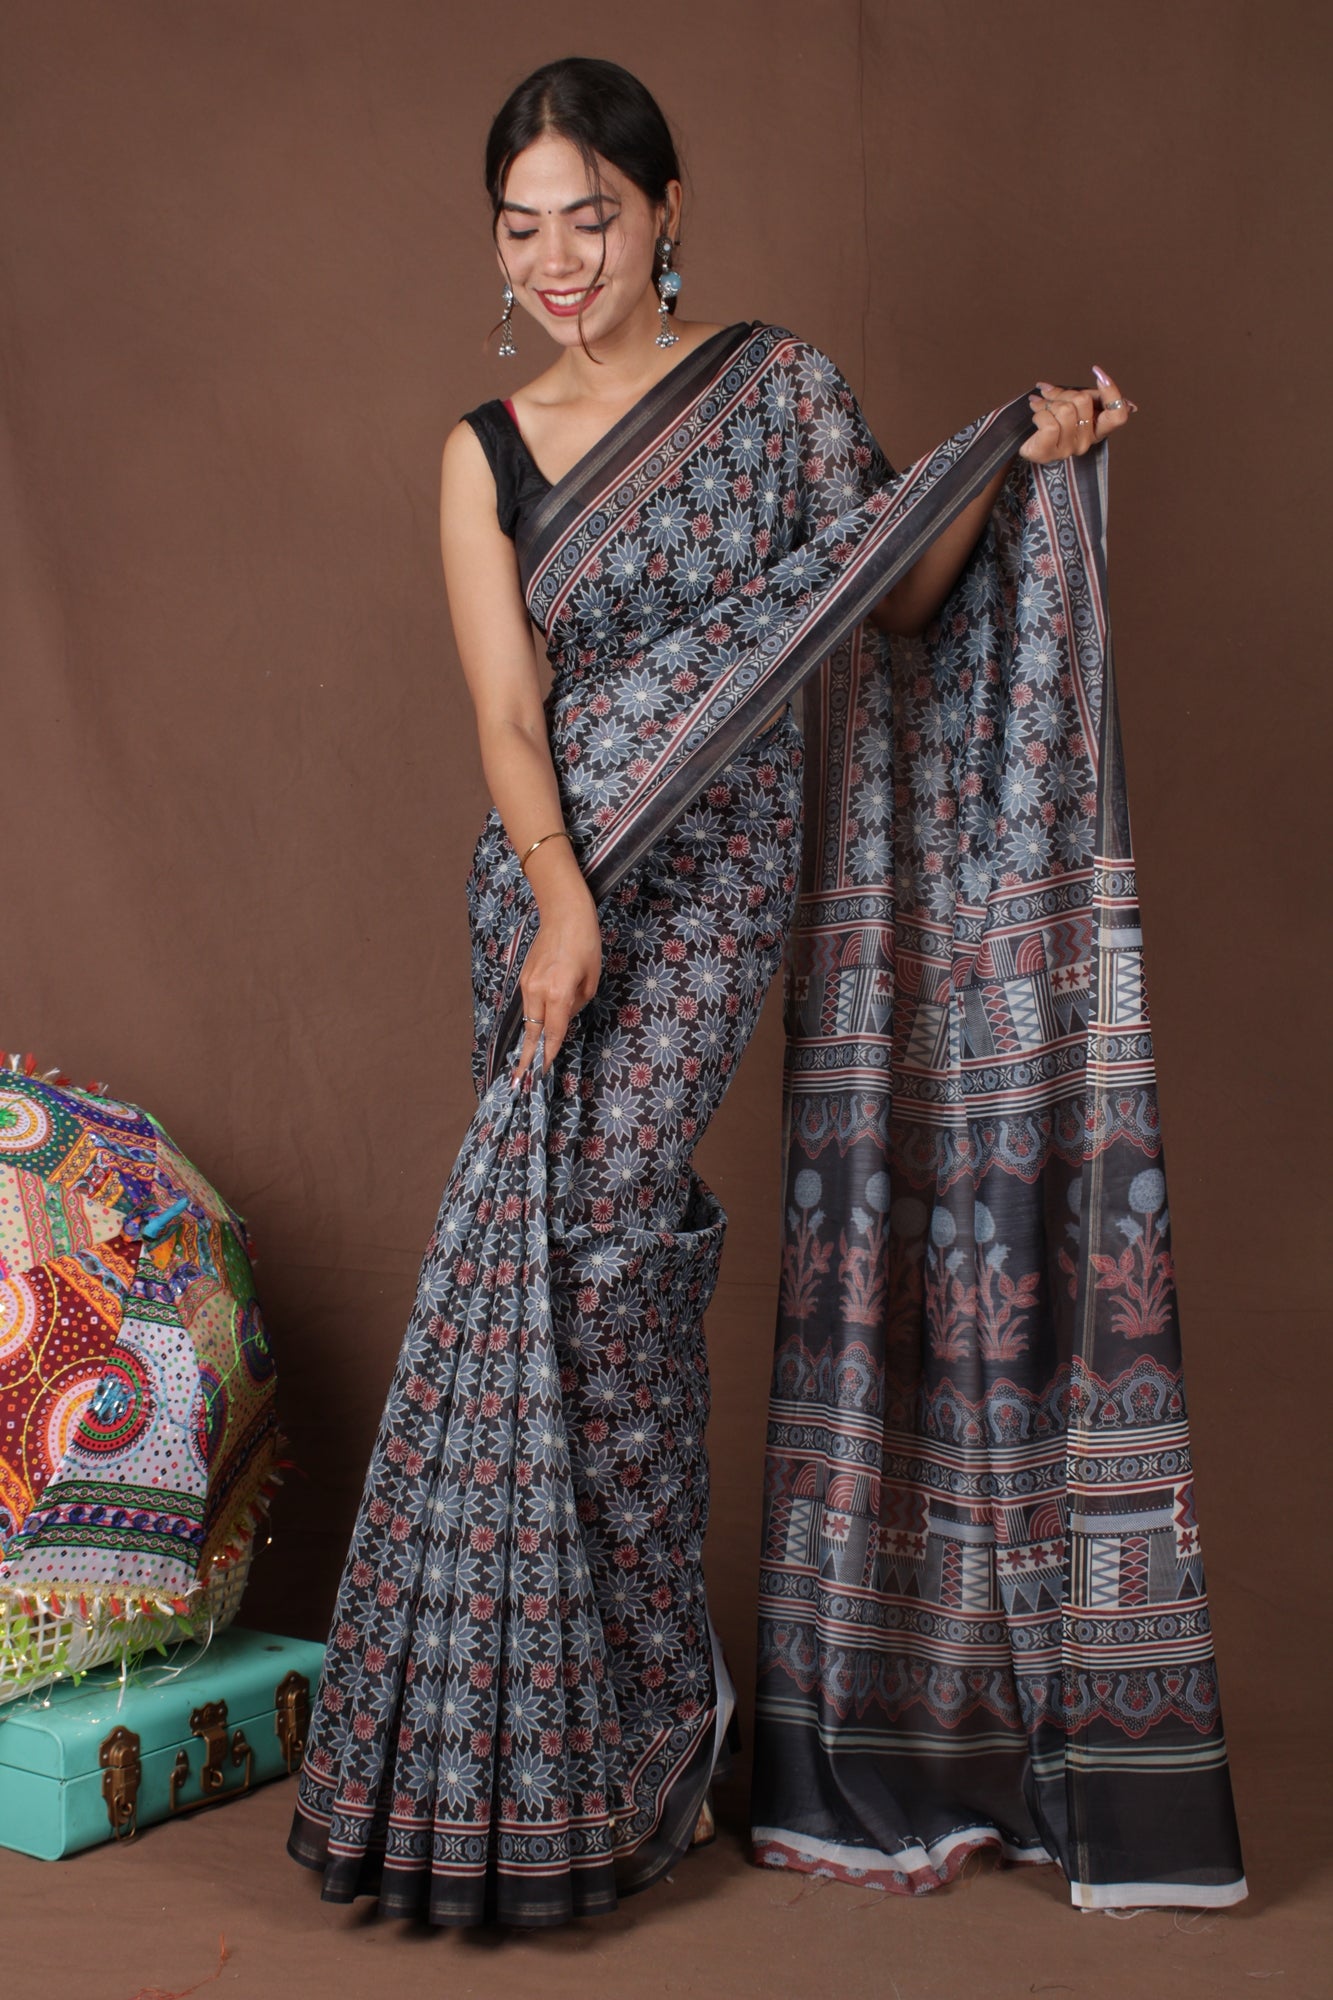 Exquisite Black & Grey Printed Beautiful Pallu Wrap in 1 Minute Drape Saree With Readymade Blouse - Isadora Life Online Shopping Store